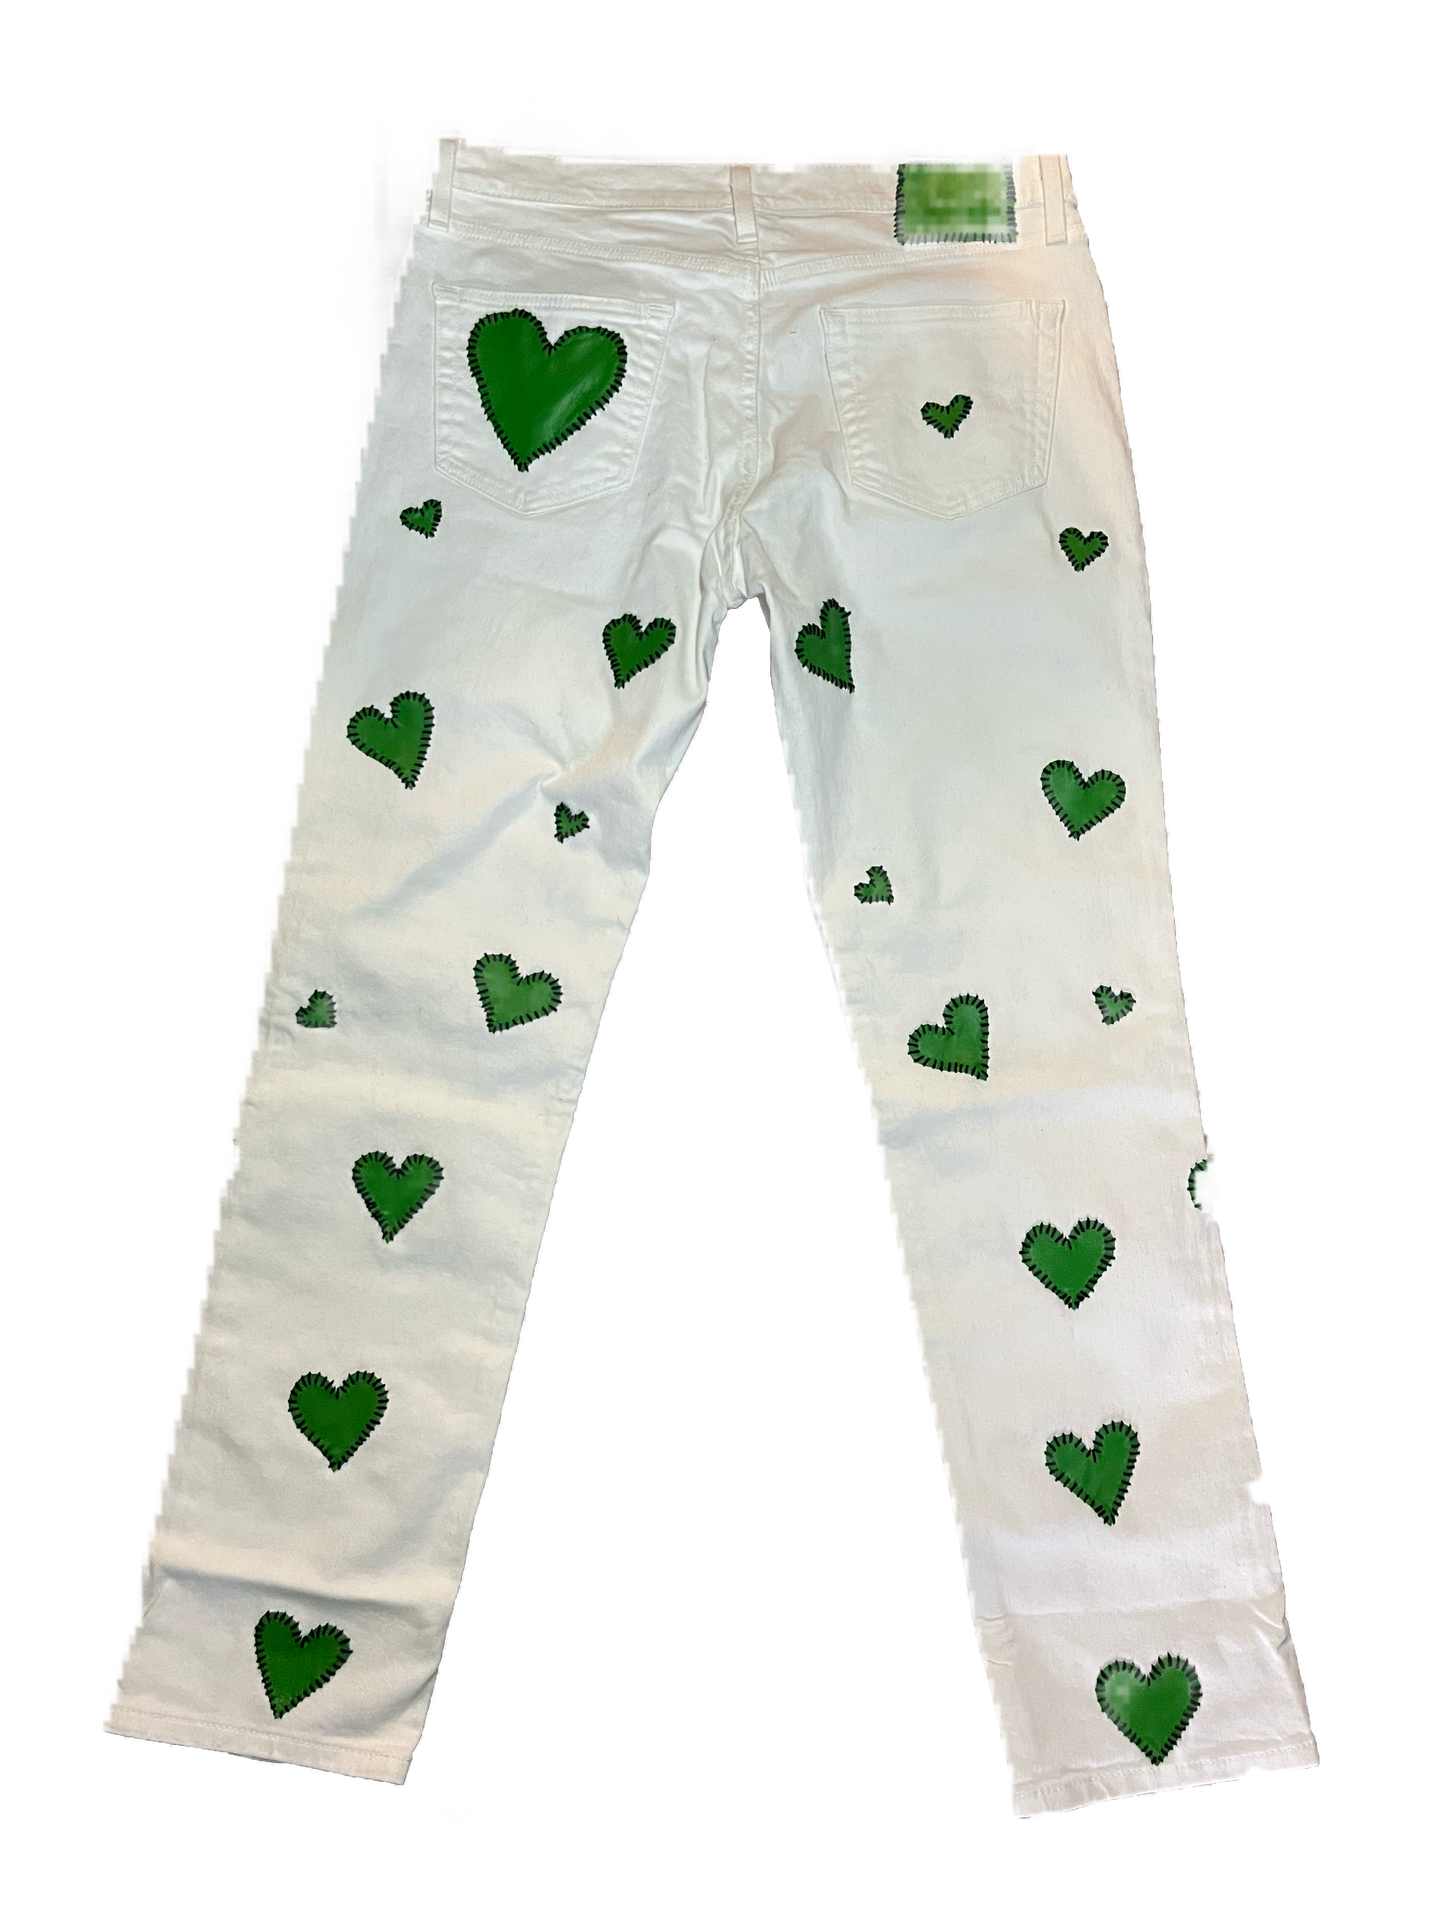 Made to order LoveJeans By U$HKA¥